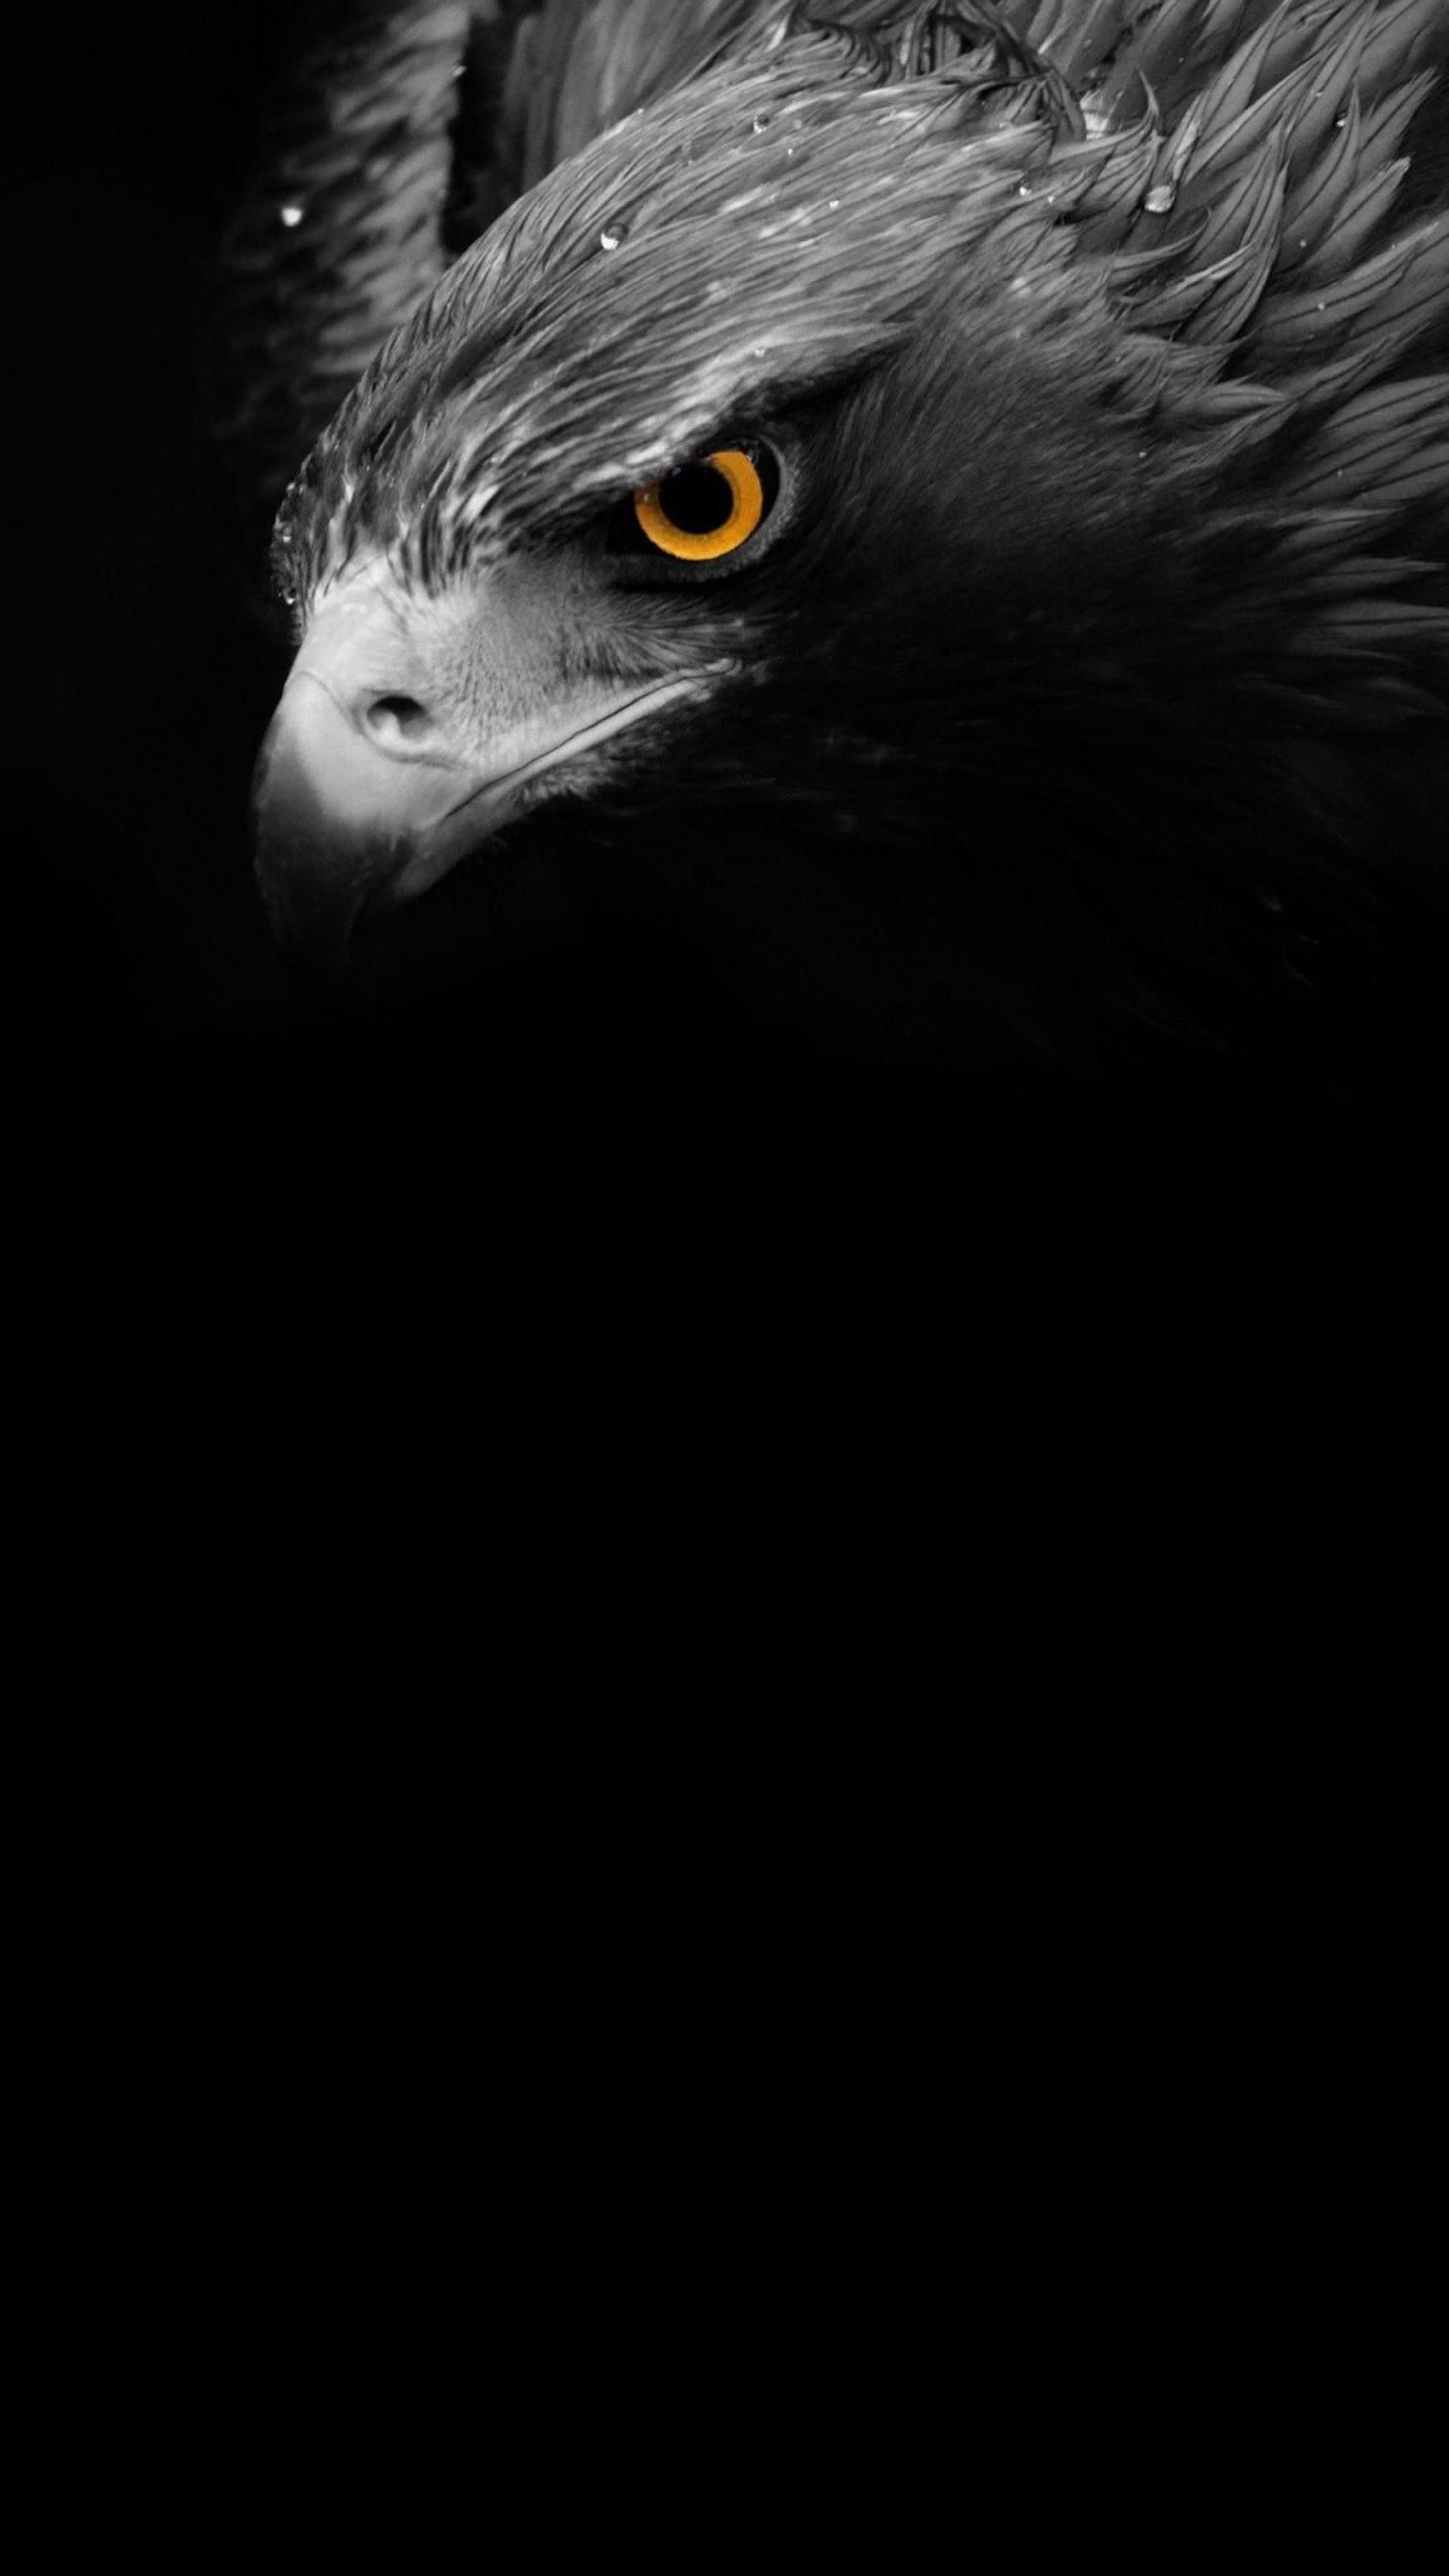 Eagle Black and White Wallpaper Free Eagle Black and White Background